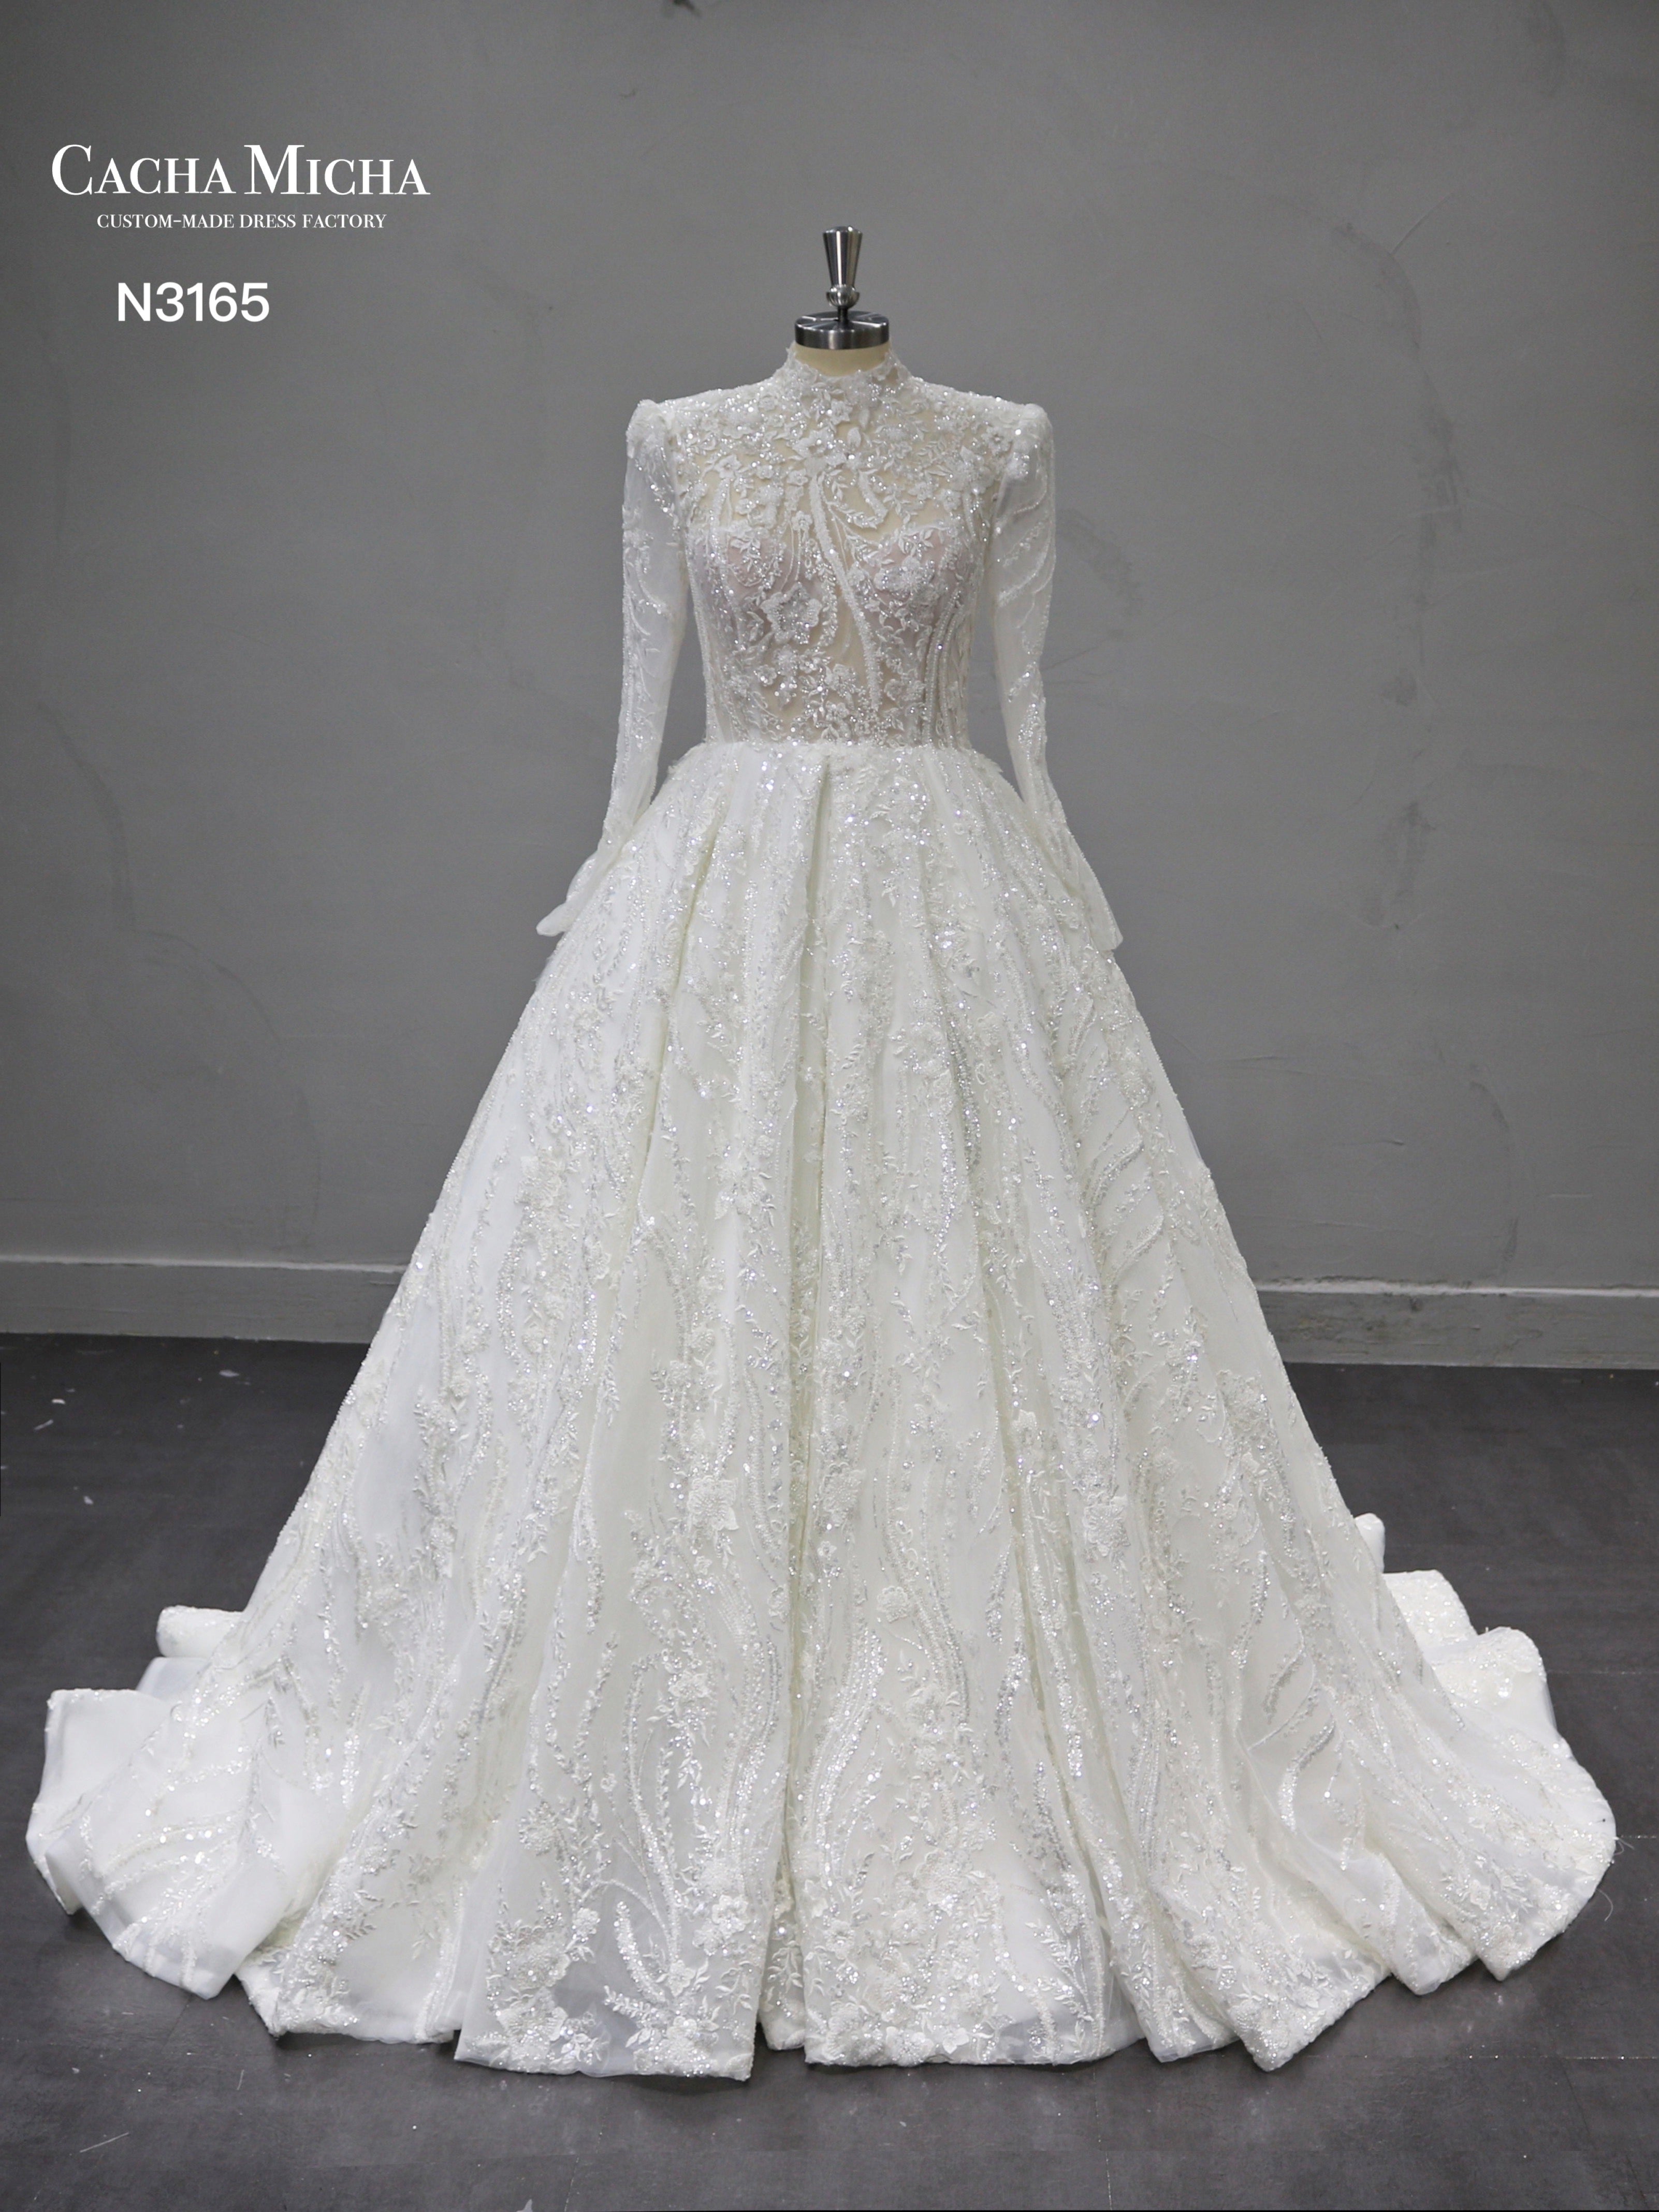 Stunning Luxury Beaded Lace Ball Gown Wedding Dress N3165